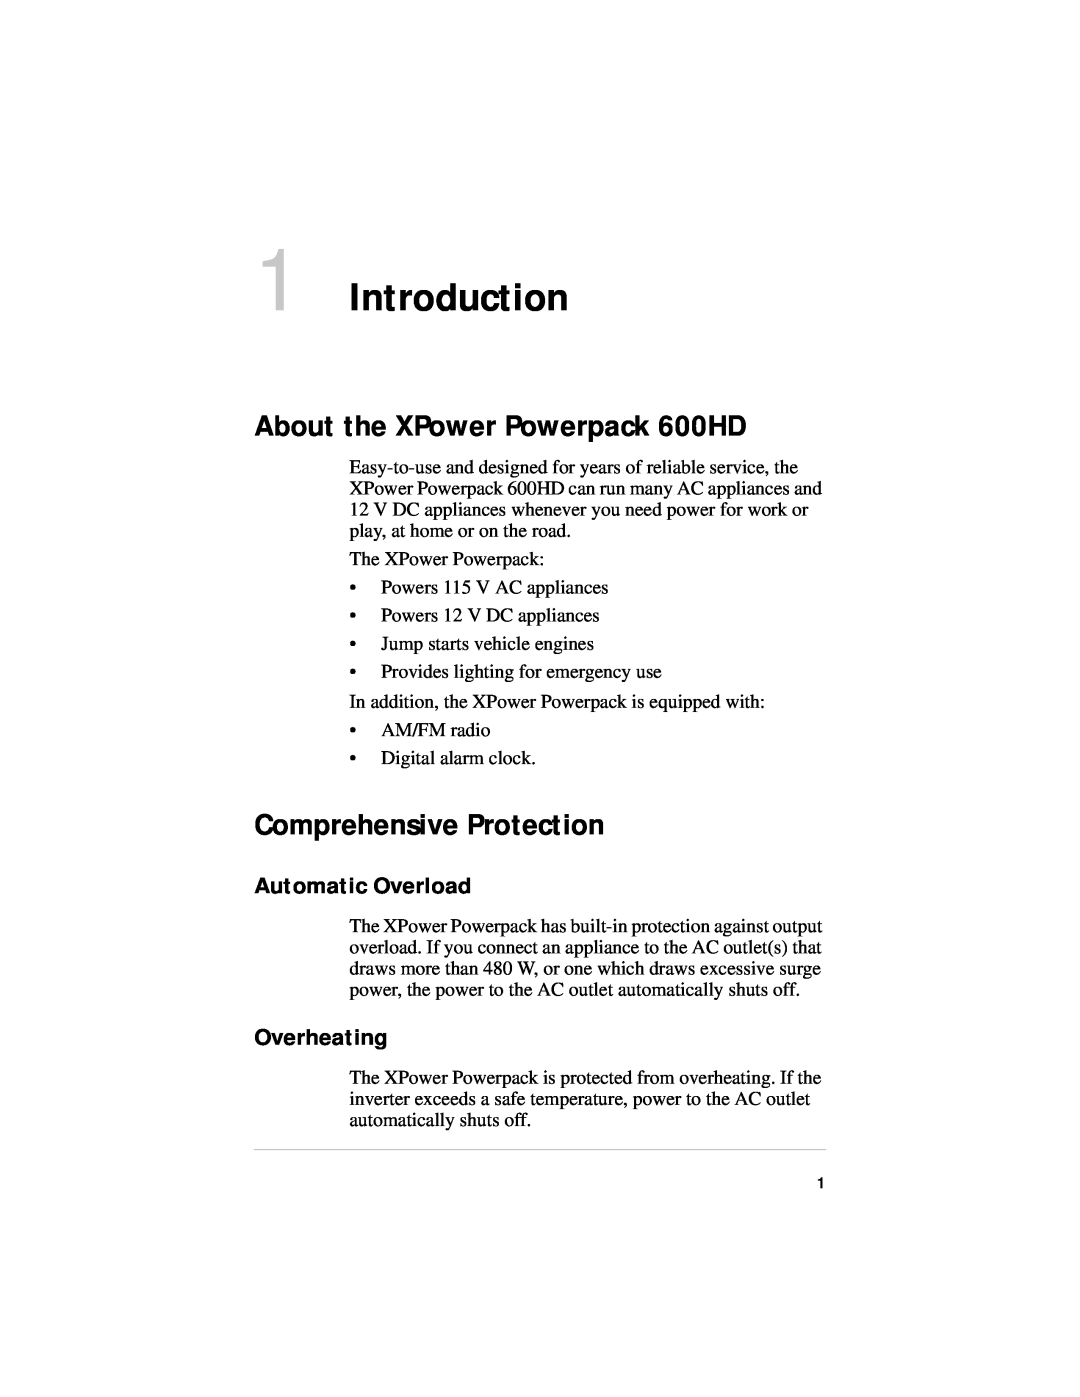 Xantrex Technology manual Introduction, About the XPower Powerpack 600HD, Comprehensive Protection, Automatic Overload 